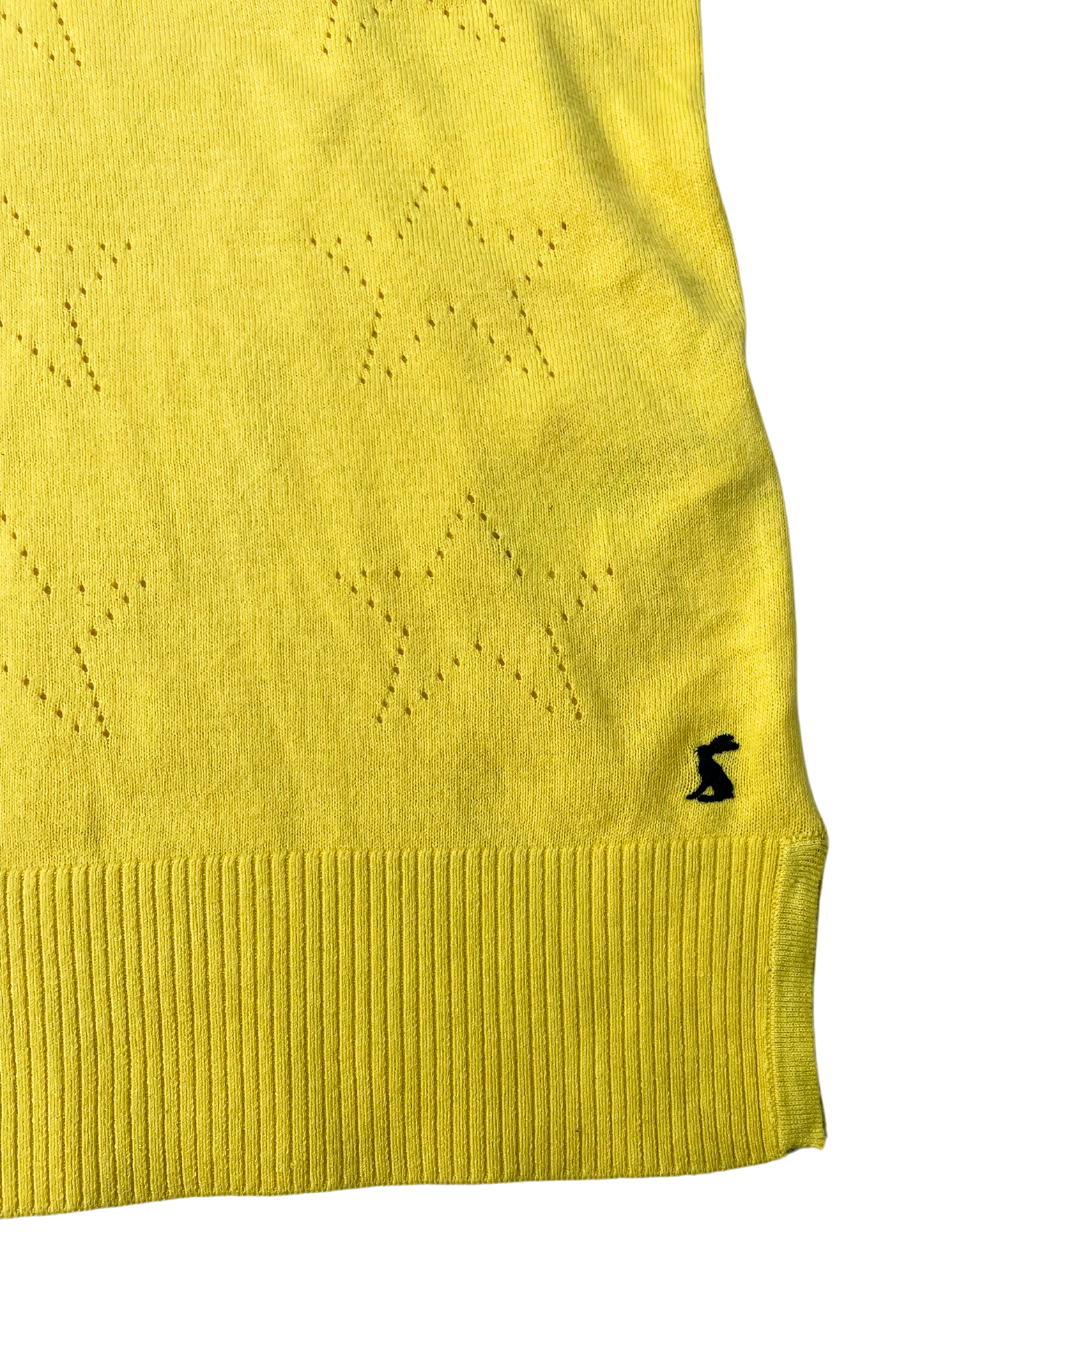 Joules Yellow Knit Jumper